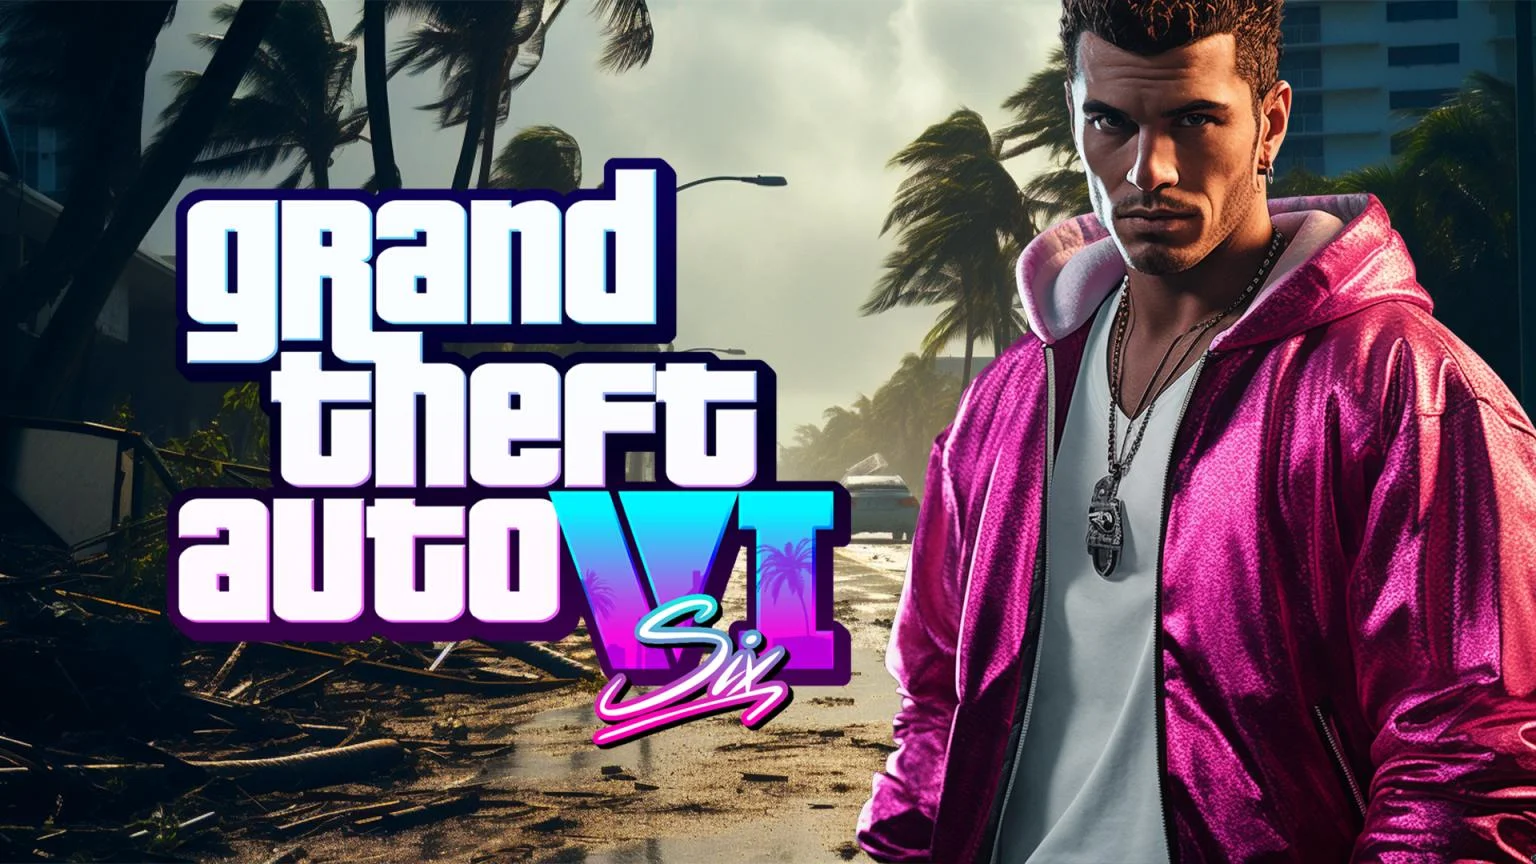 Countdown to GTA 6: Fans Buzz Over Trailer and Scrapped Weather System Rumors